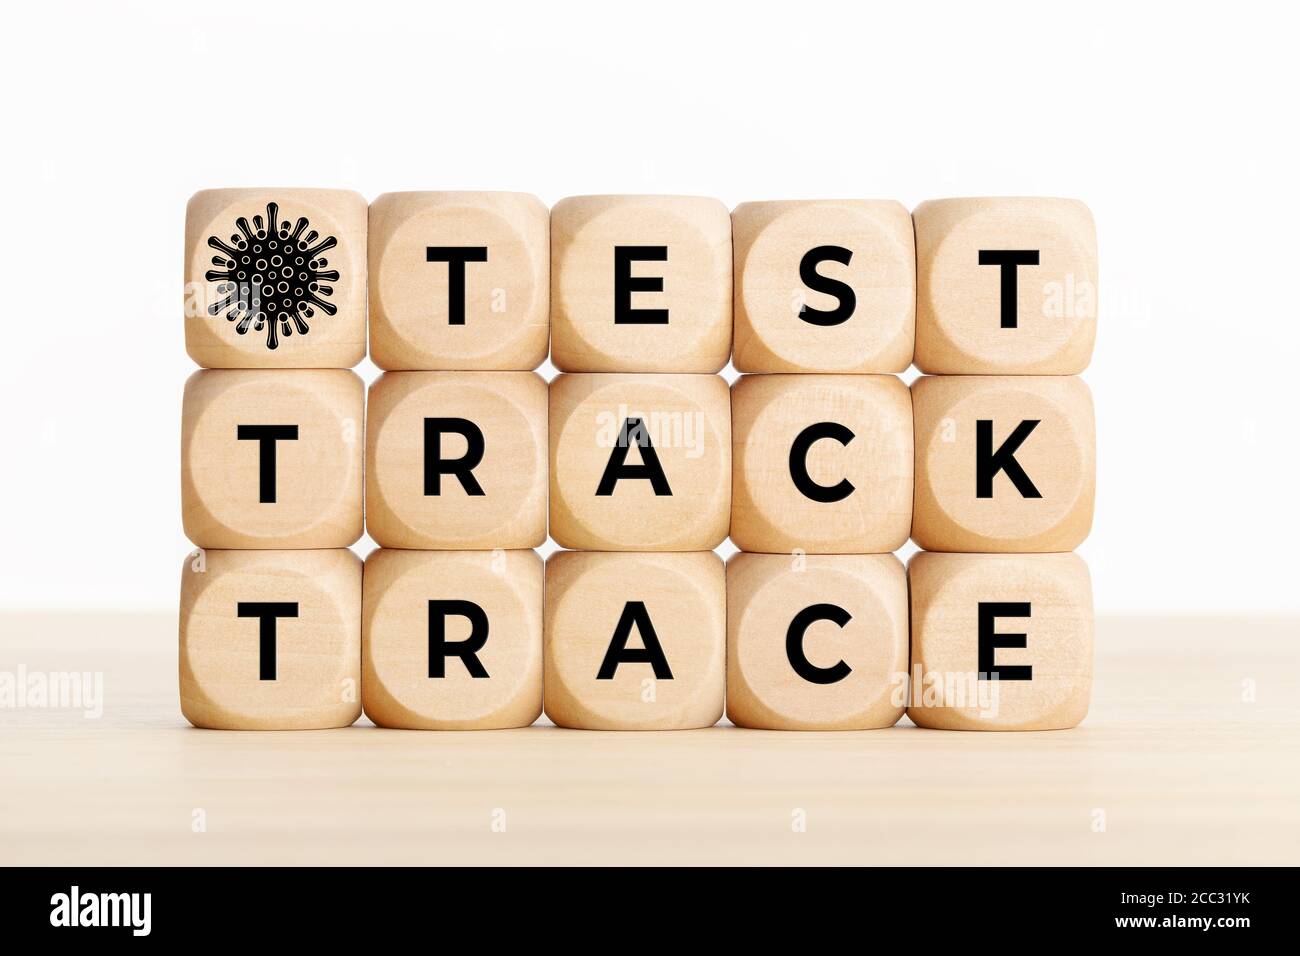 Test Trace Track Covid-19 Coronavirus concept. Wooden block with text on wooden table Stock Photo